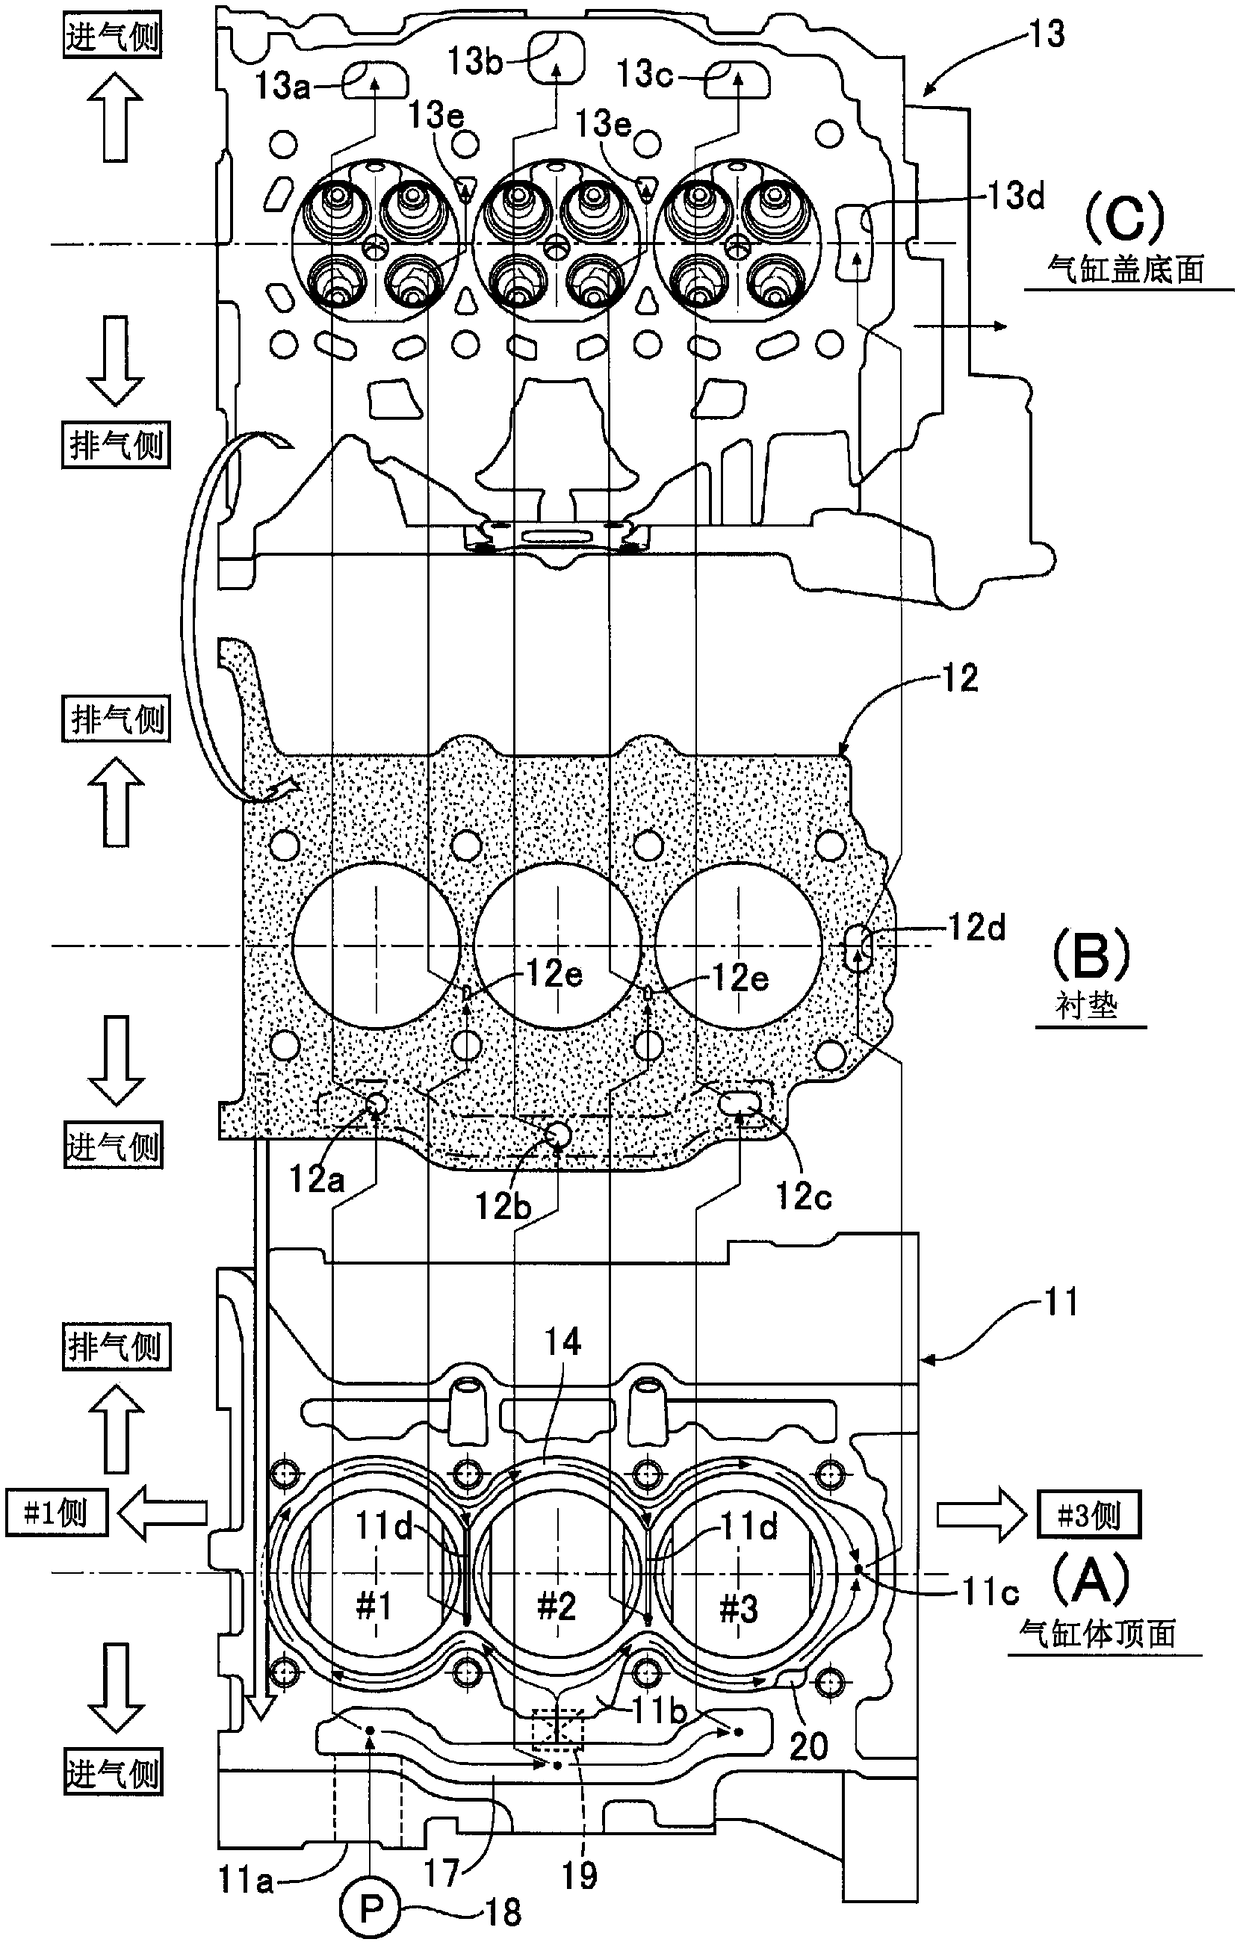 Cooling structure for water-cooled engine